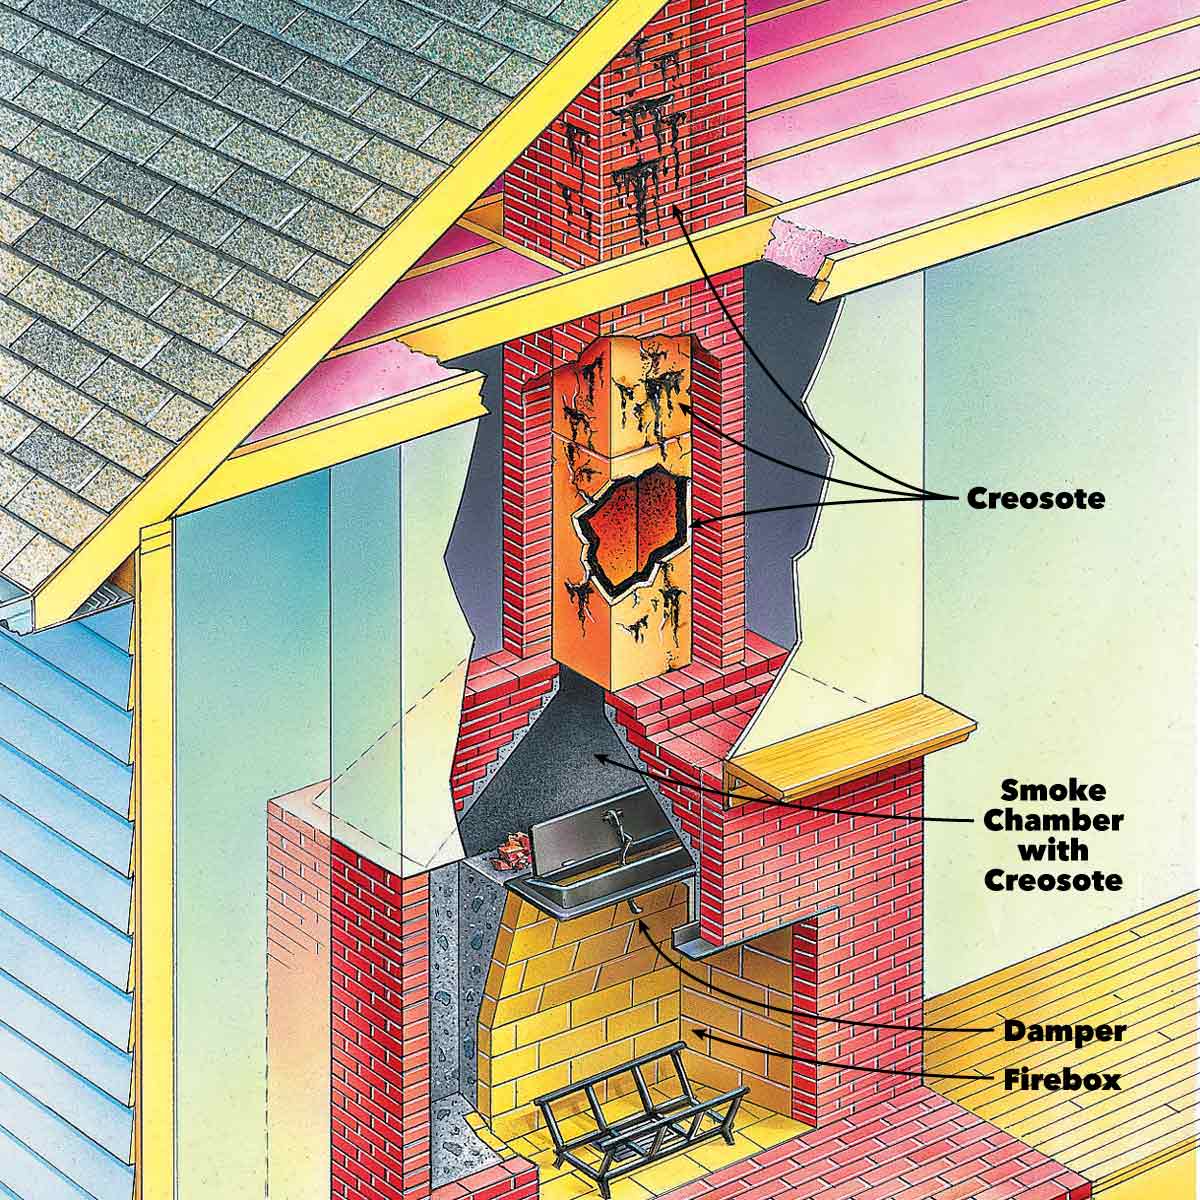 Having your chimney cleaned annually helps to prevent chimney fires and keeps your family safe. Find out more at ow.ly/xMSv50Qtnyn